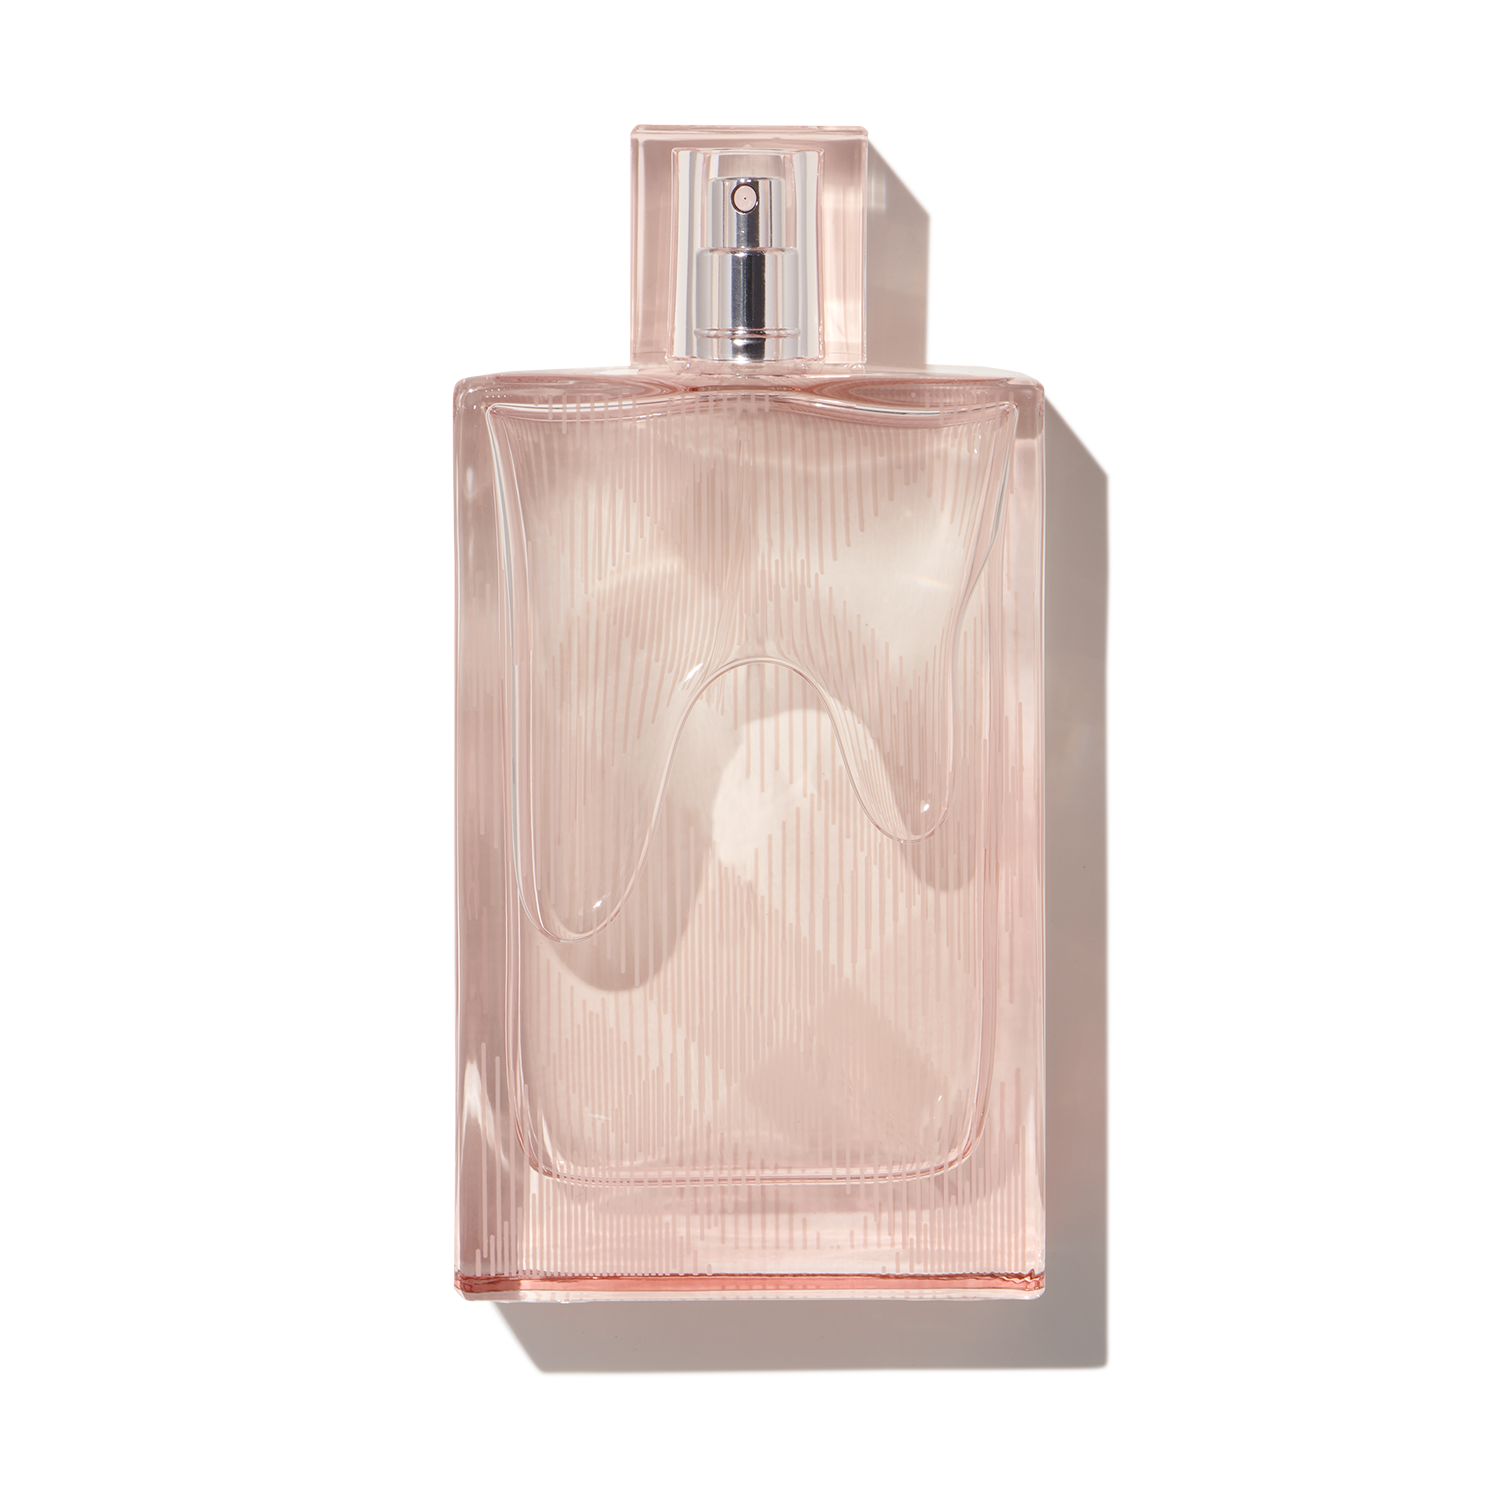 Get Burberry Brit Sheer for $16.95 Scentbird at